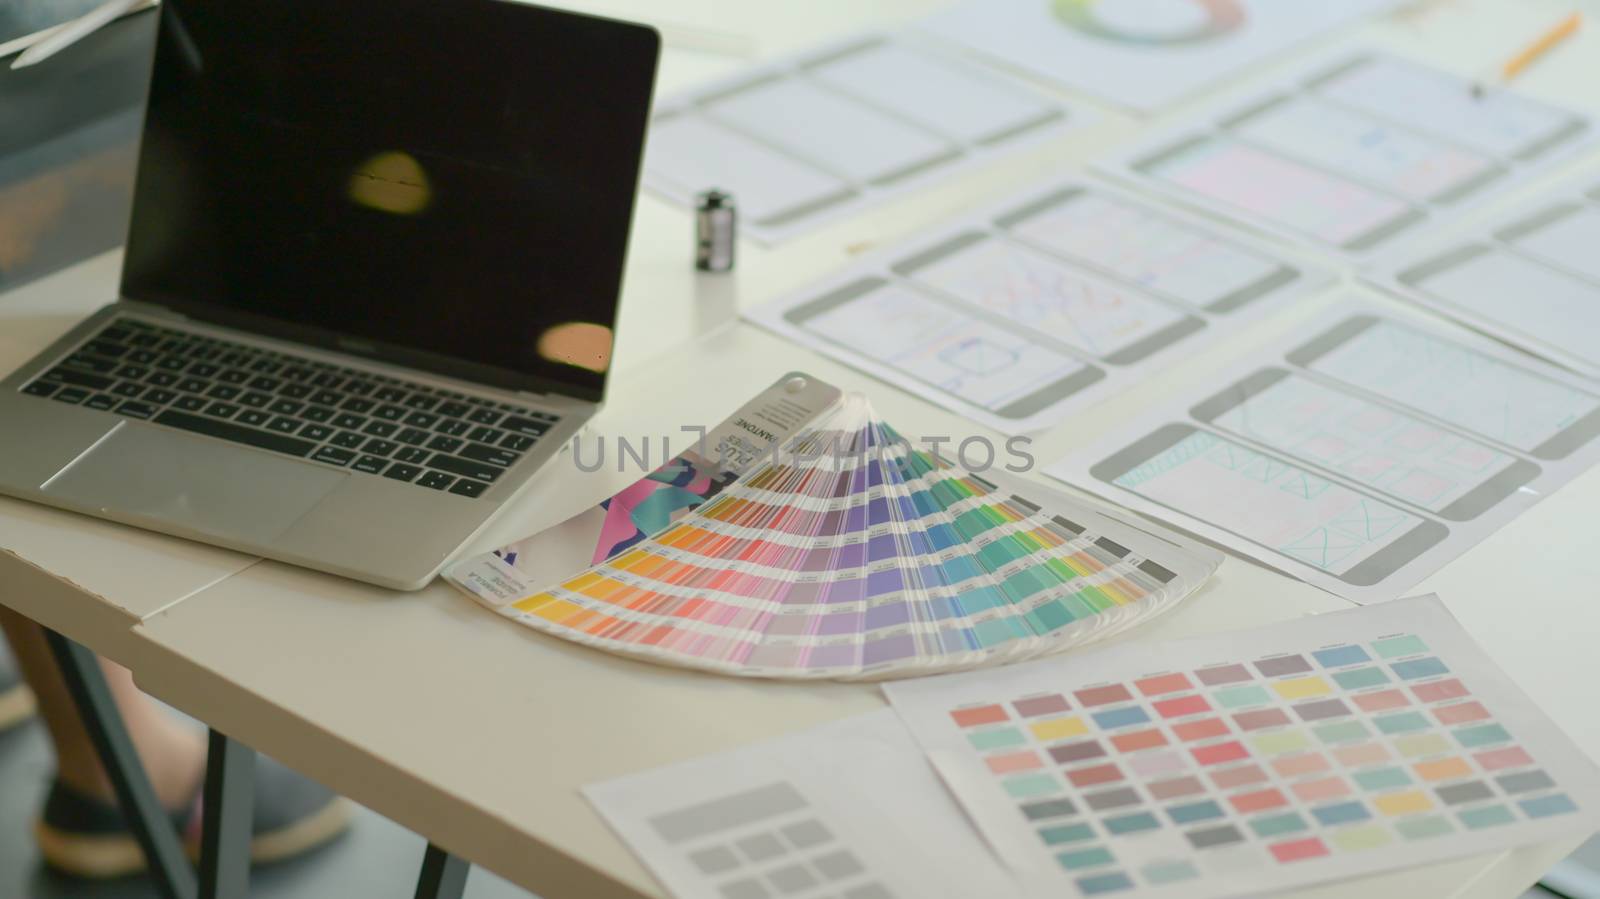 Laptops with color charts and equipment on the desk for the UX team to design apps in a modern office.